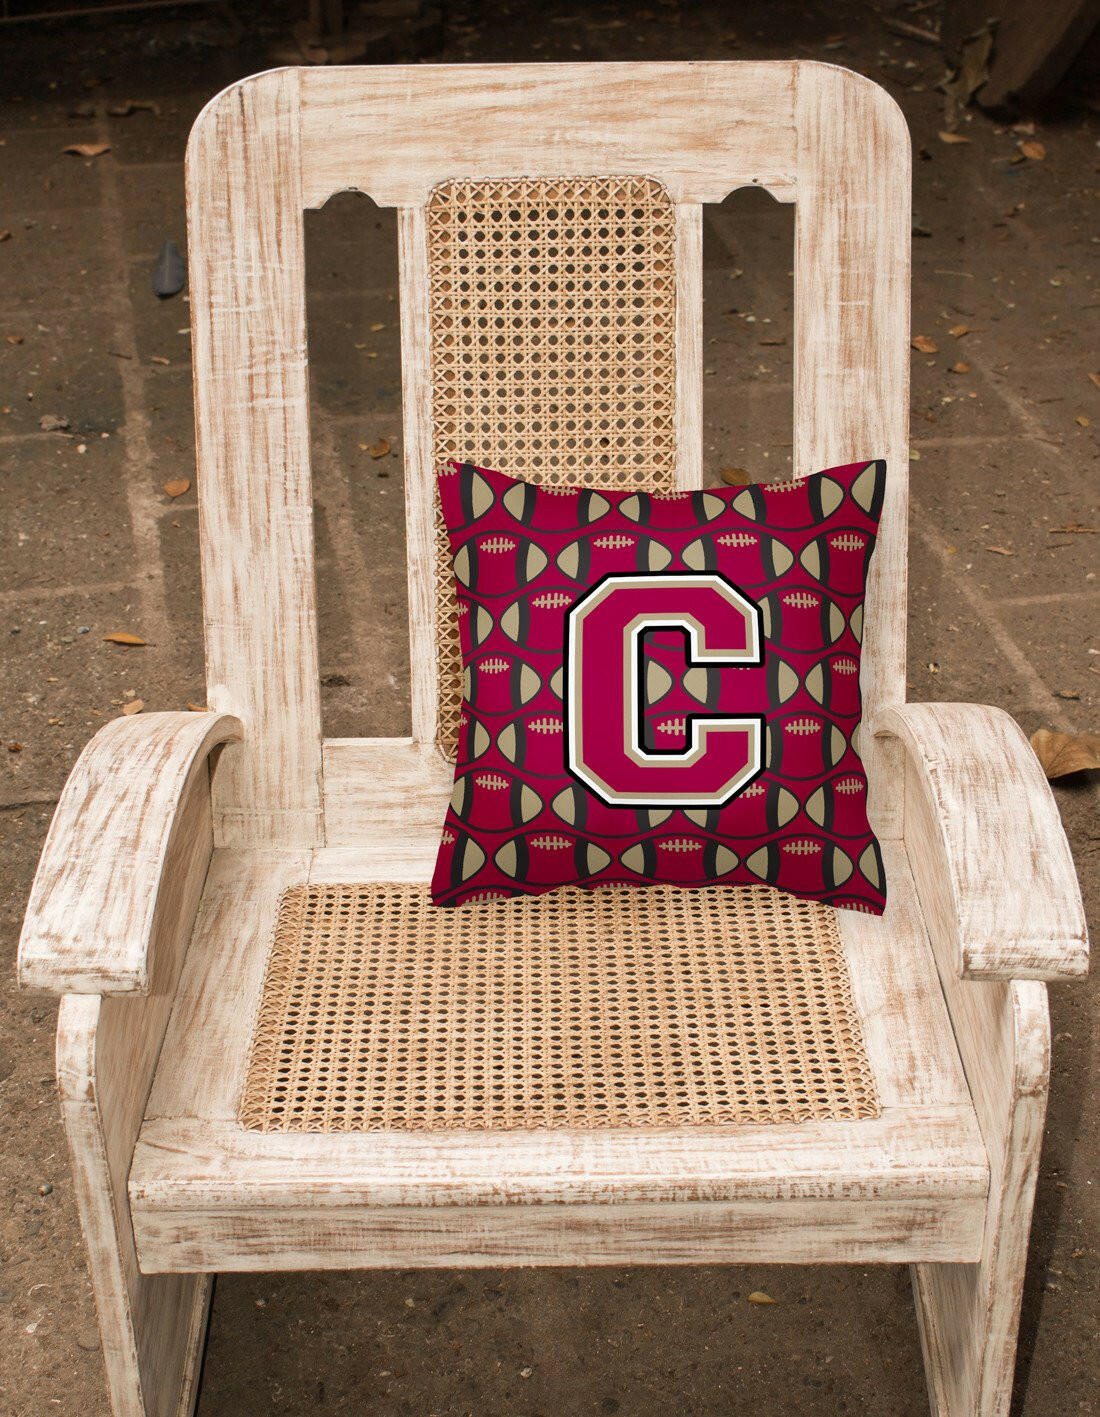 Letter C Football Garnet and Gold Fabric Decorative Pillow CJ1078-CPW1414 by Caroline's Treasures